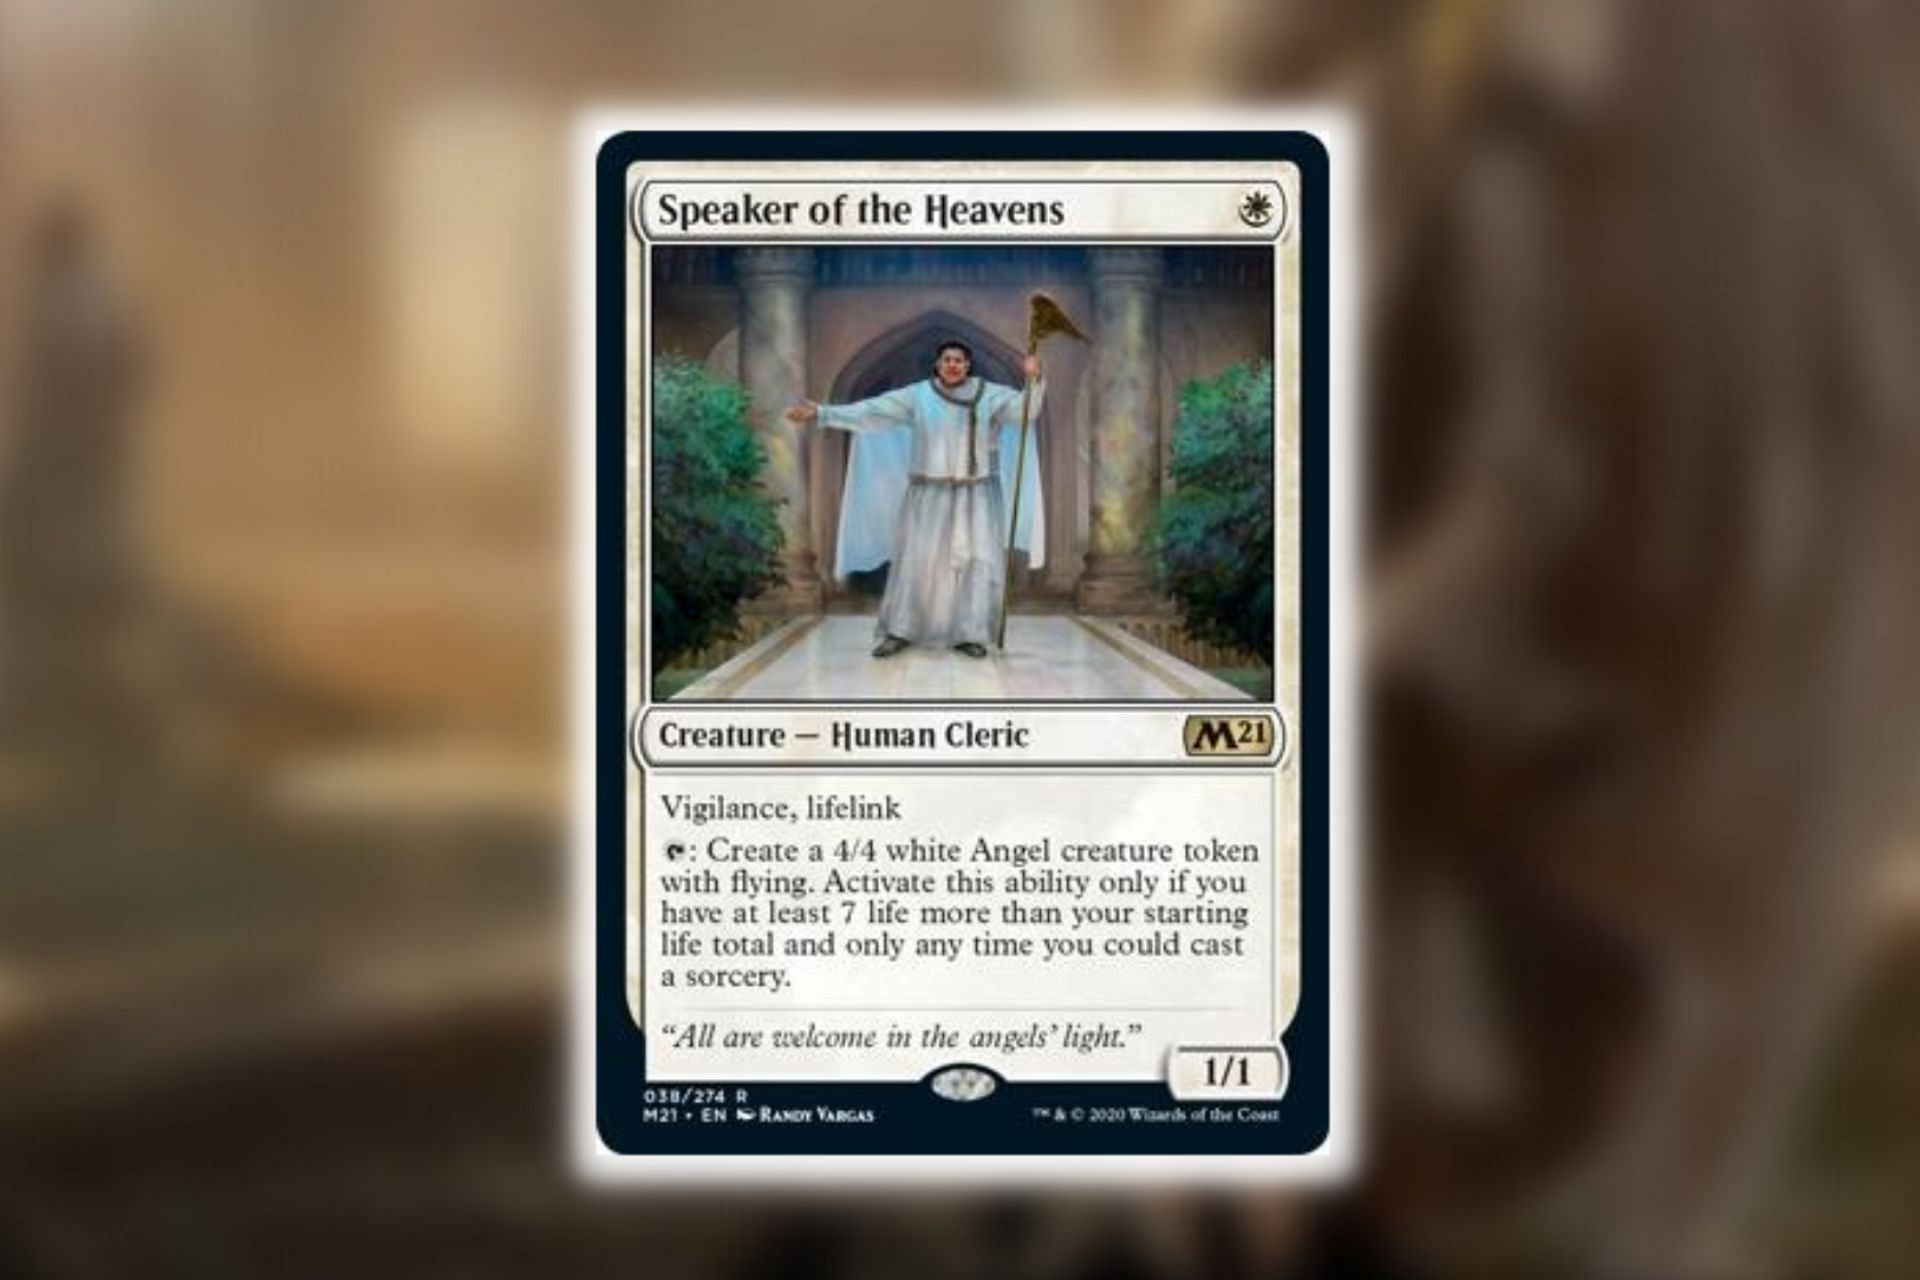 Speaker of the Heavens in Magic: The Gathering (Image via Wizards of the Coast)